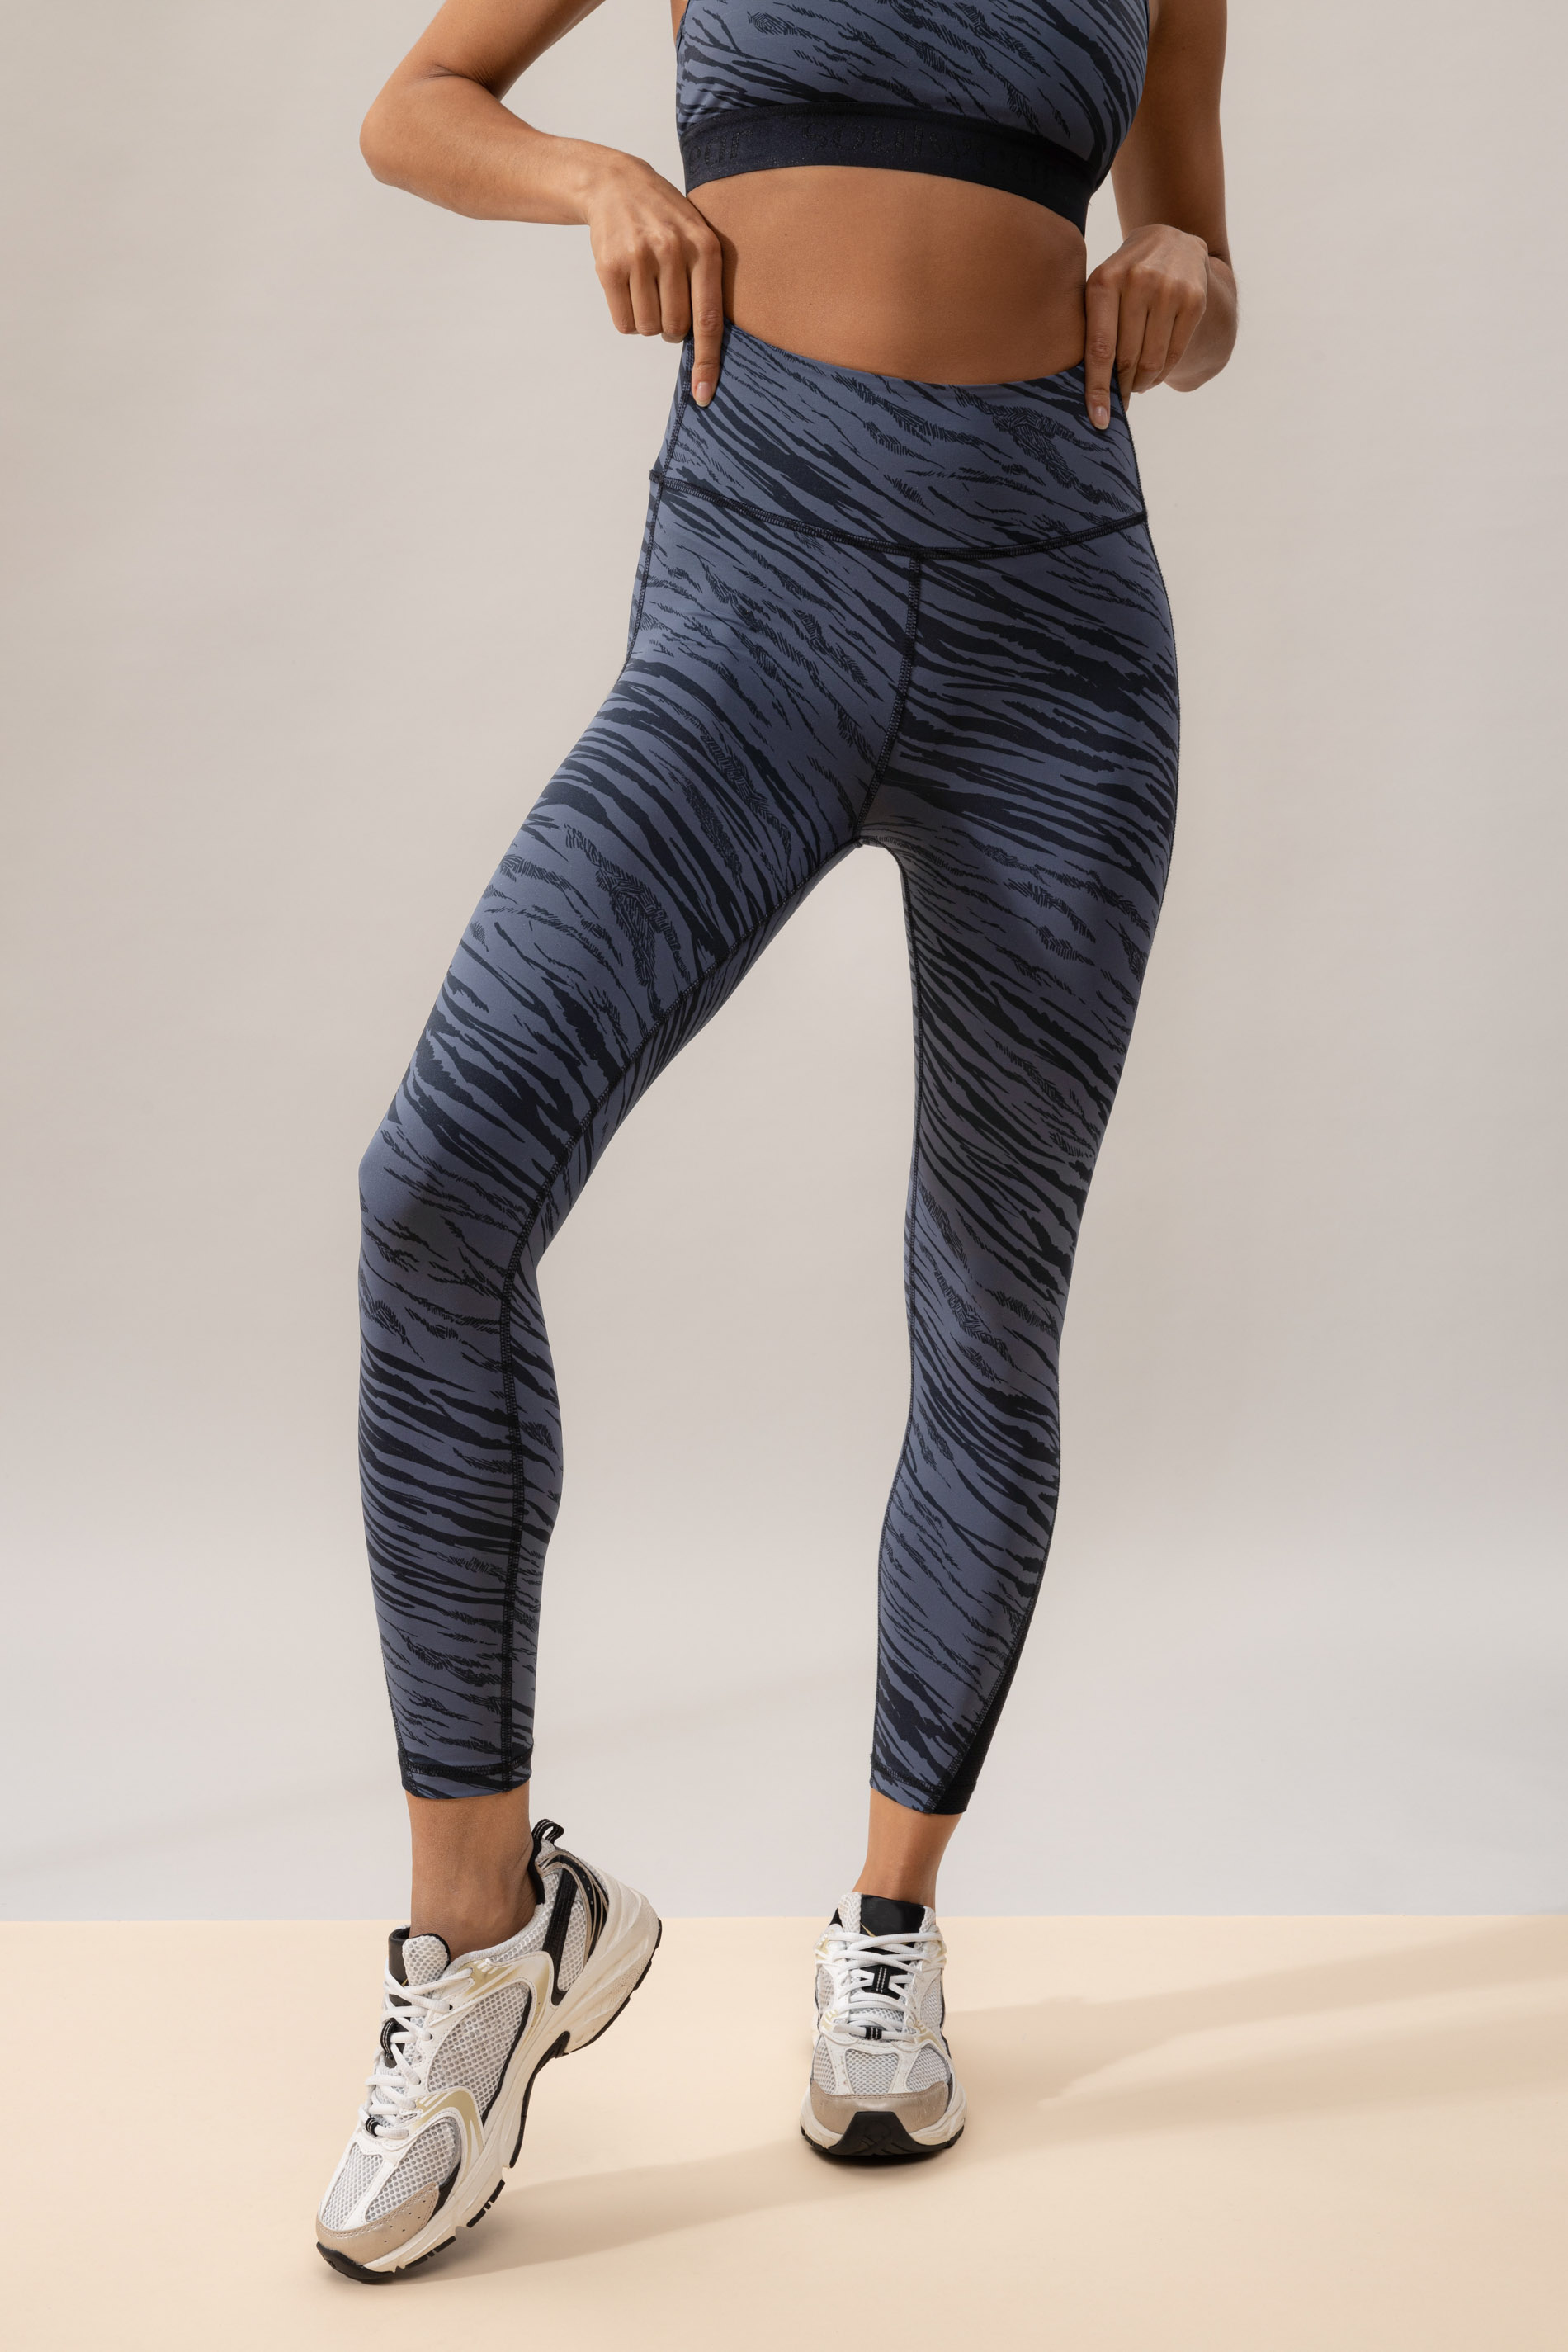 Leggings lang Carbon Serie Stretchable Frontansicht | mey®